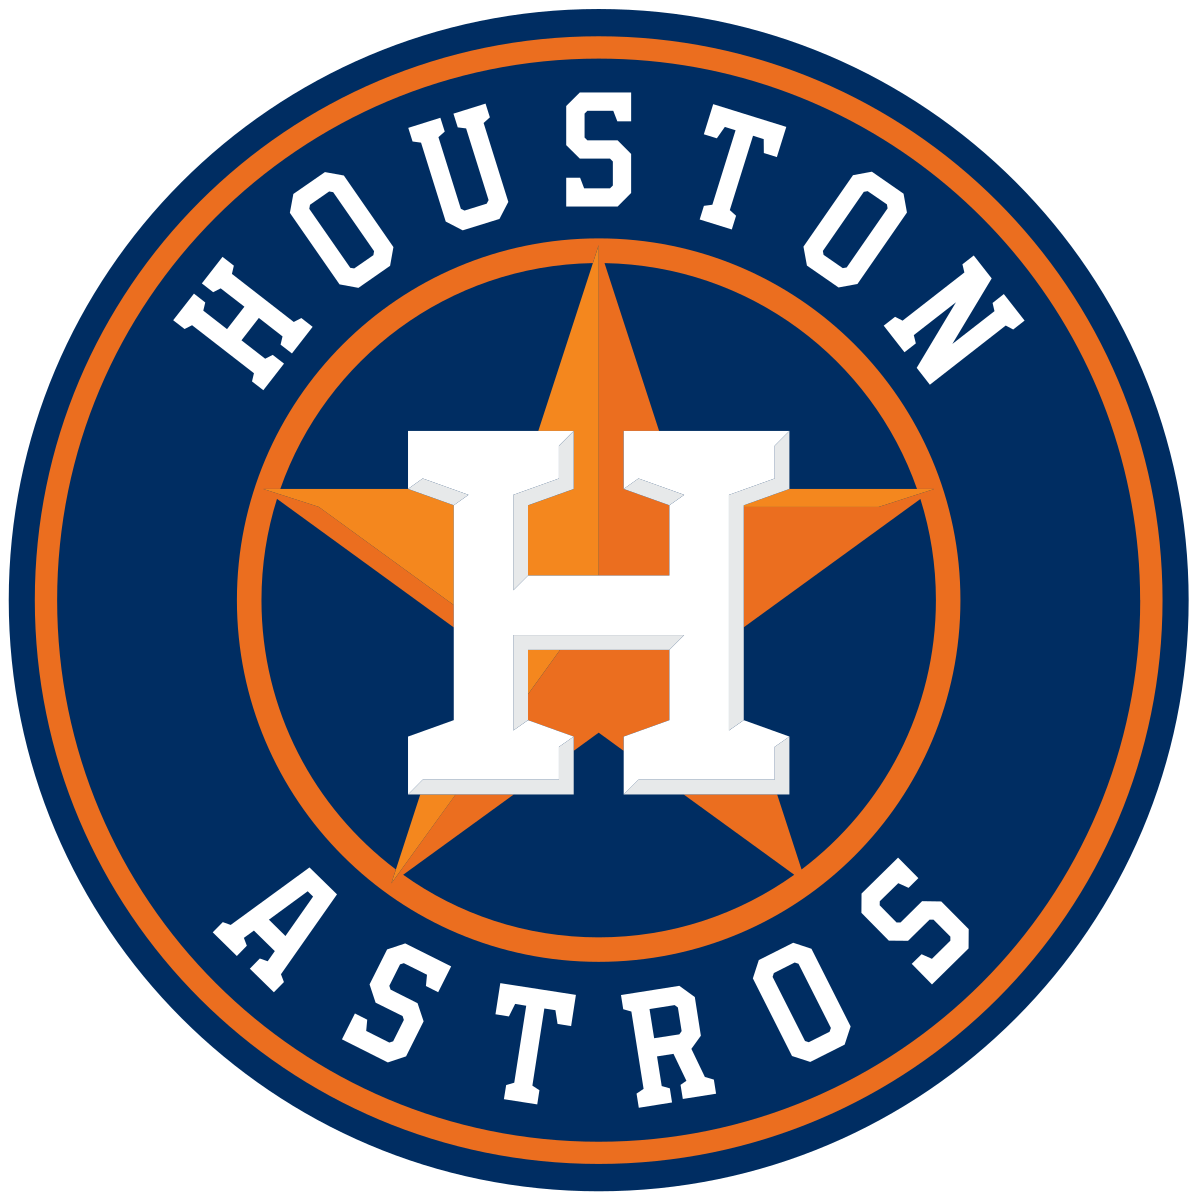 astros roster 2017